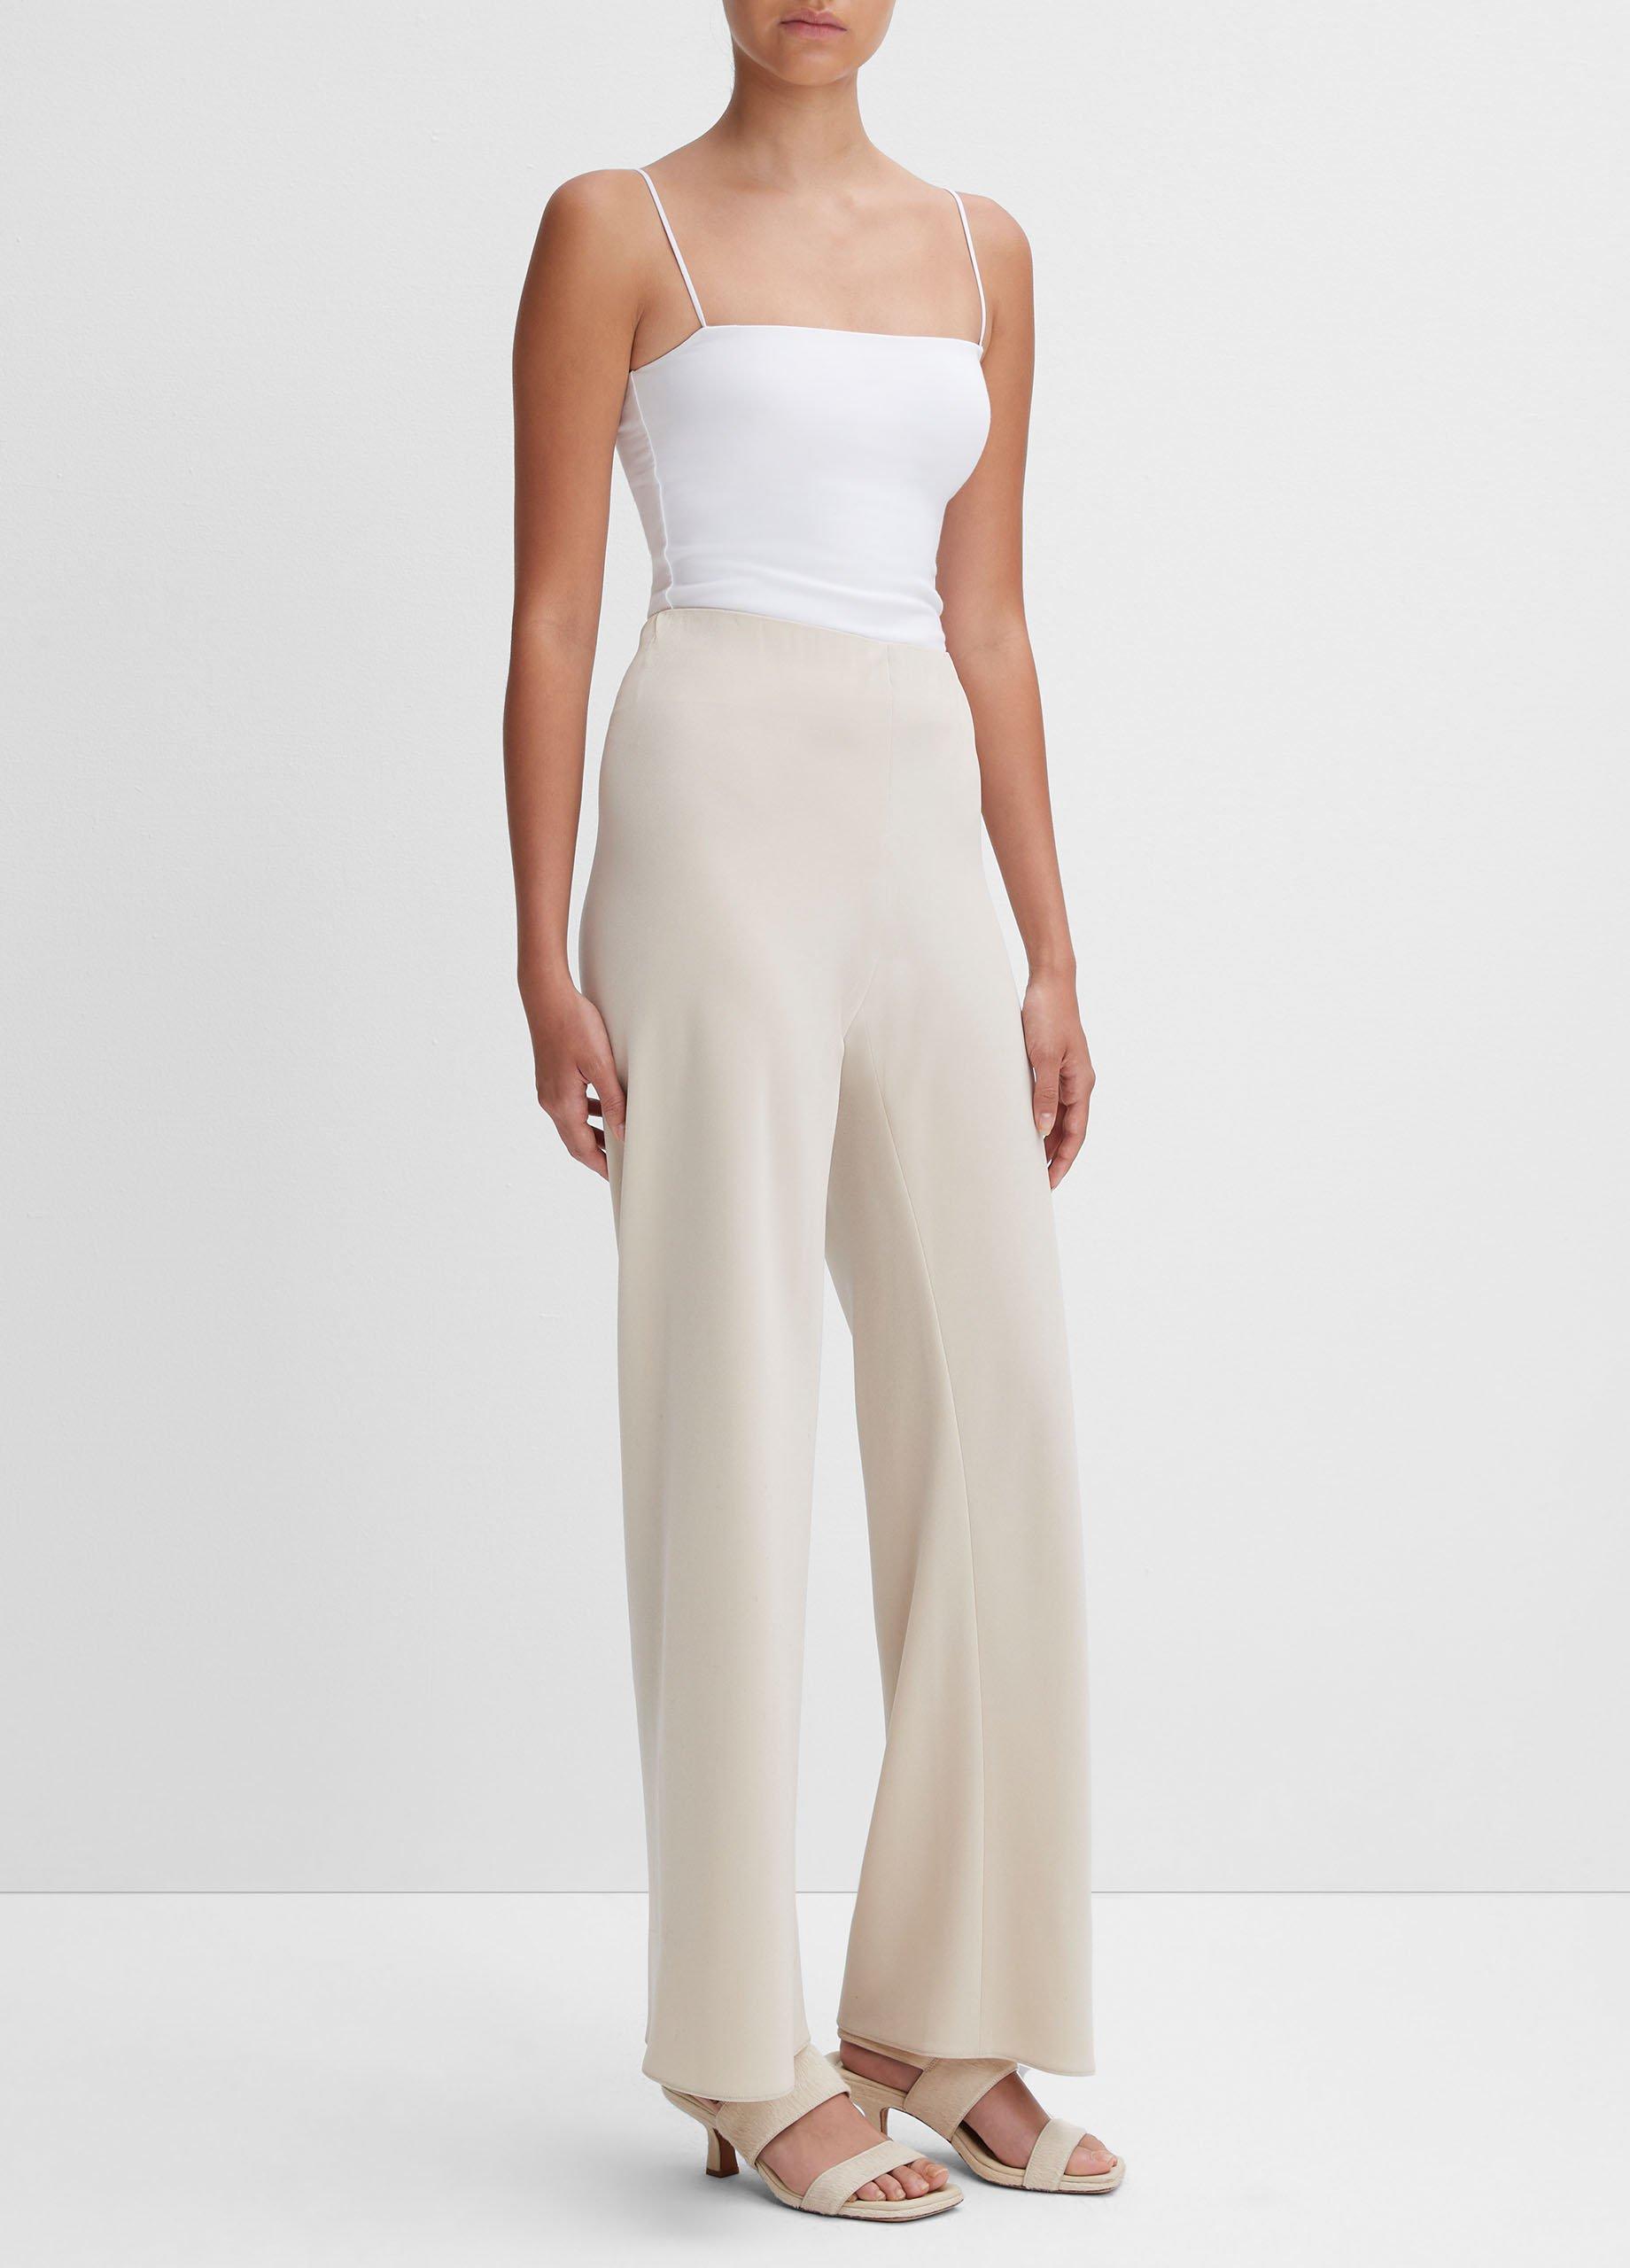 High-Waist Bias Pant in Vince Products Women